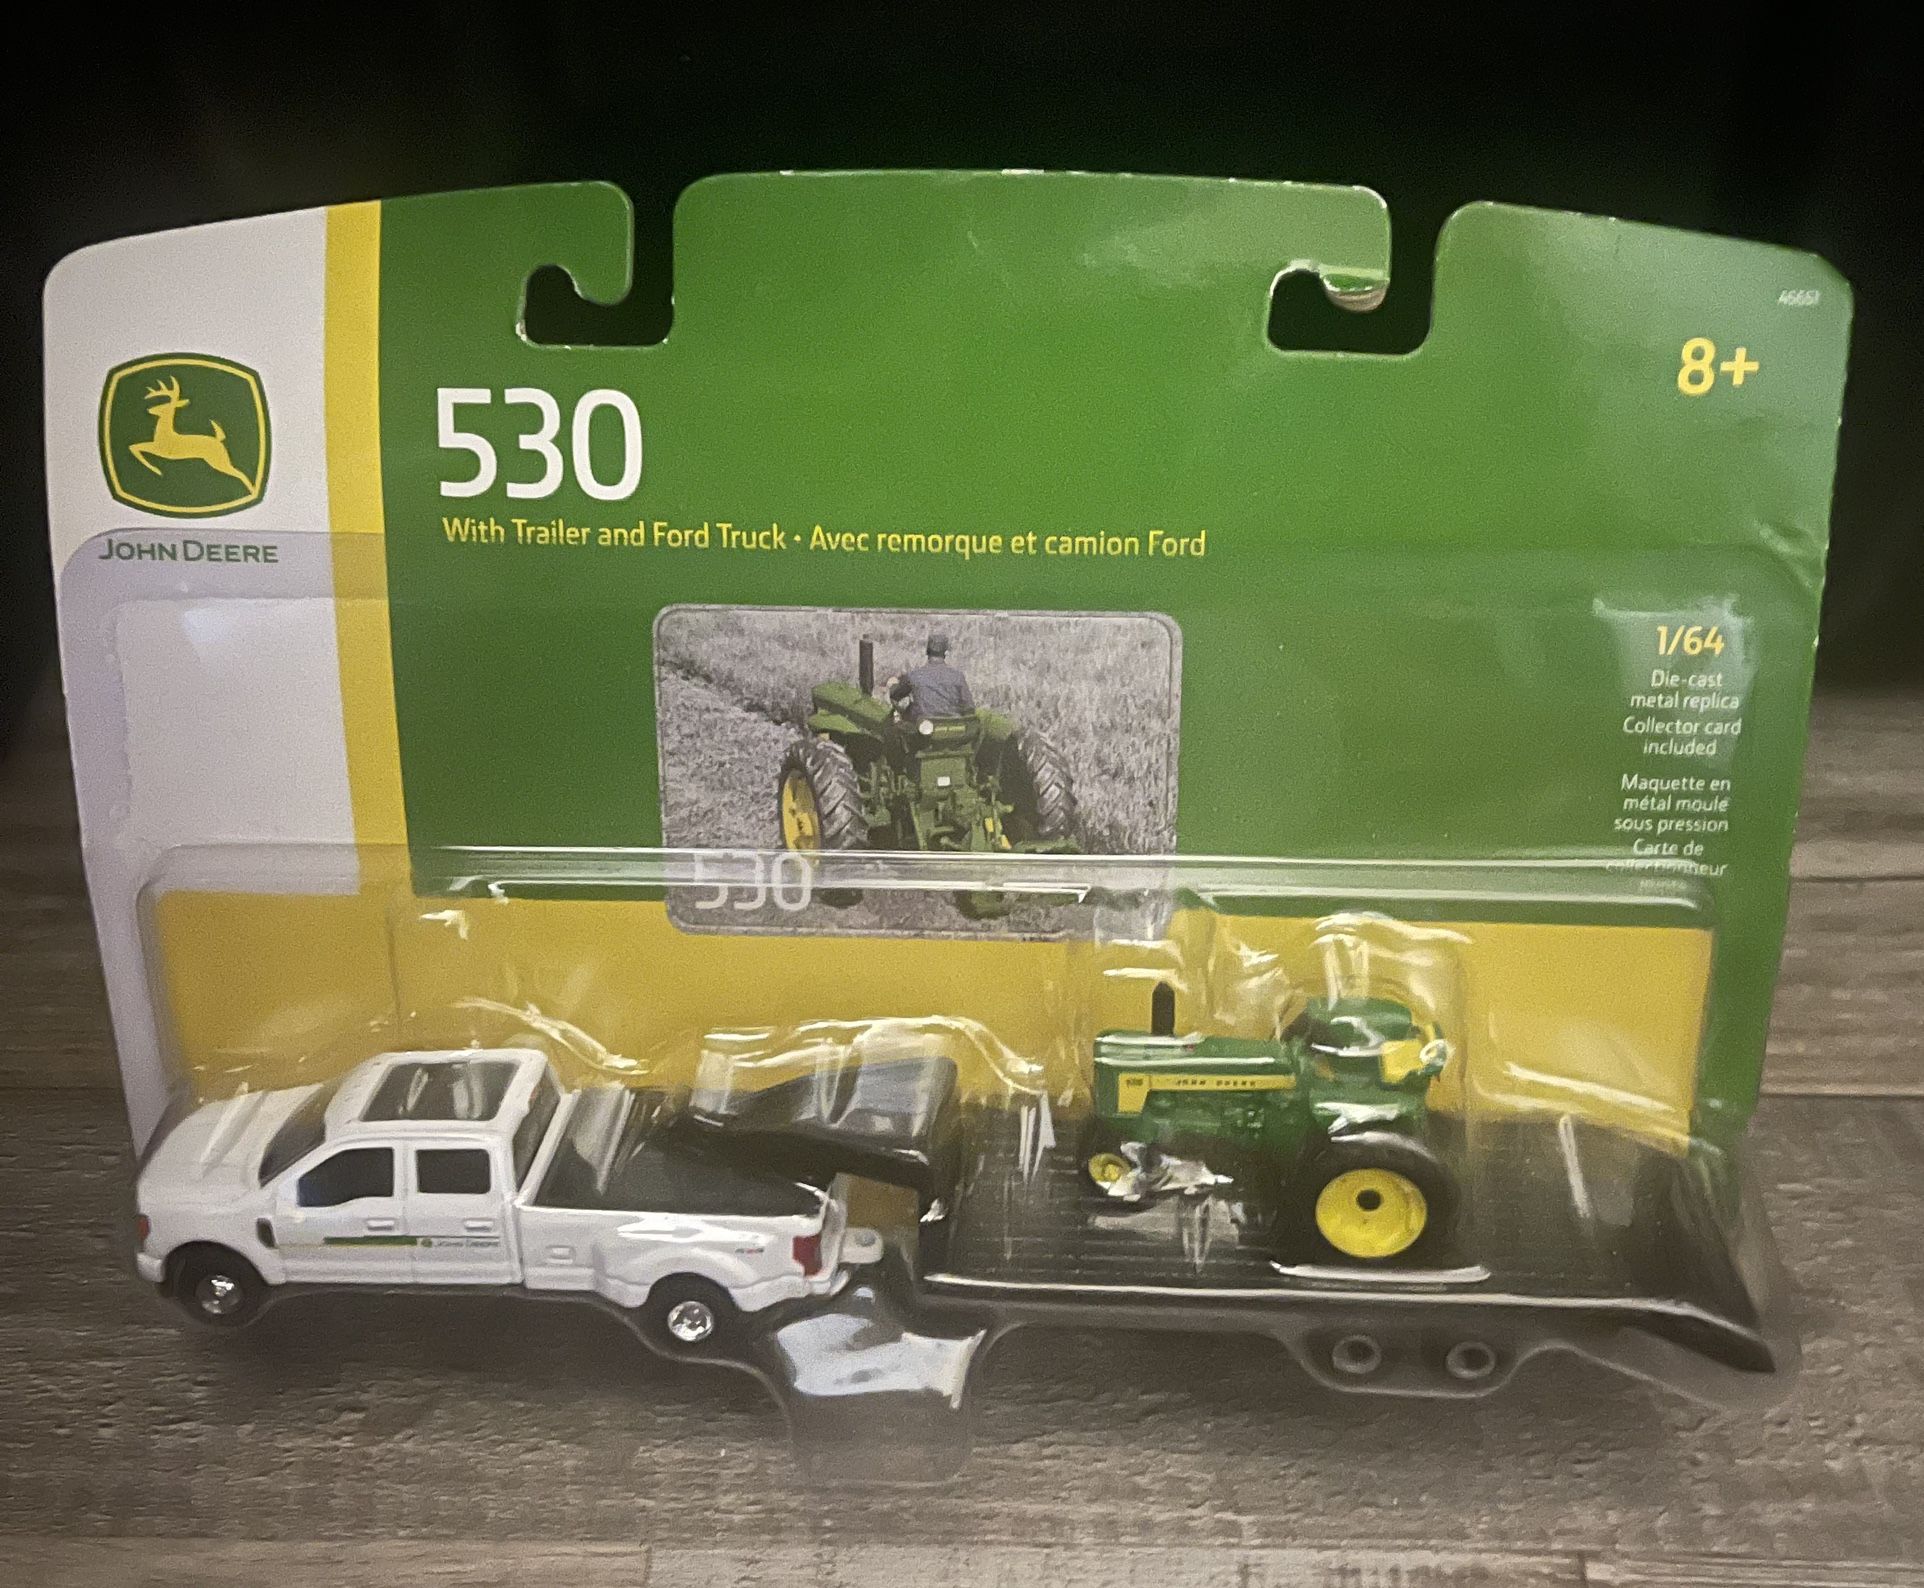 John Deere 530 Tractor with A  F350 Ford Truck and Trailer Set 1/64 Scale New 